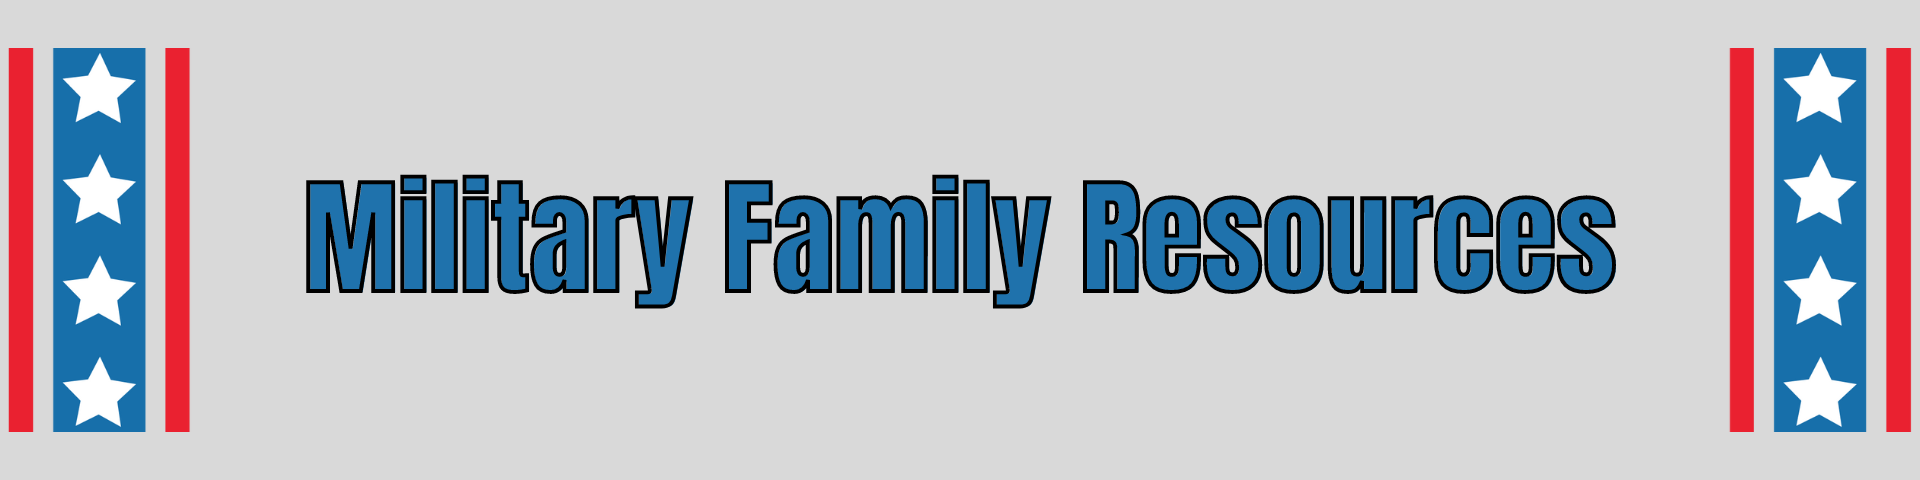 military family resources header